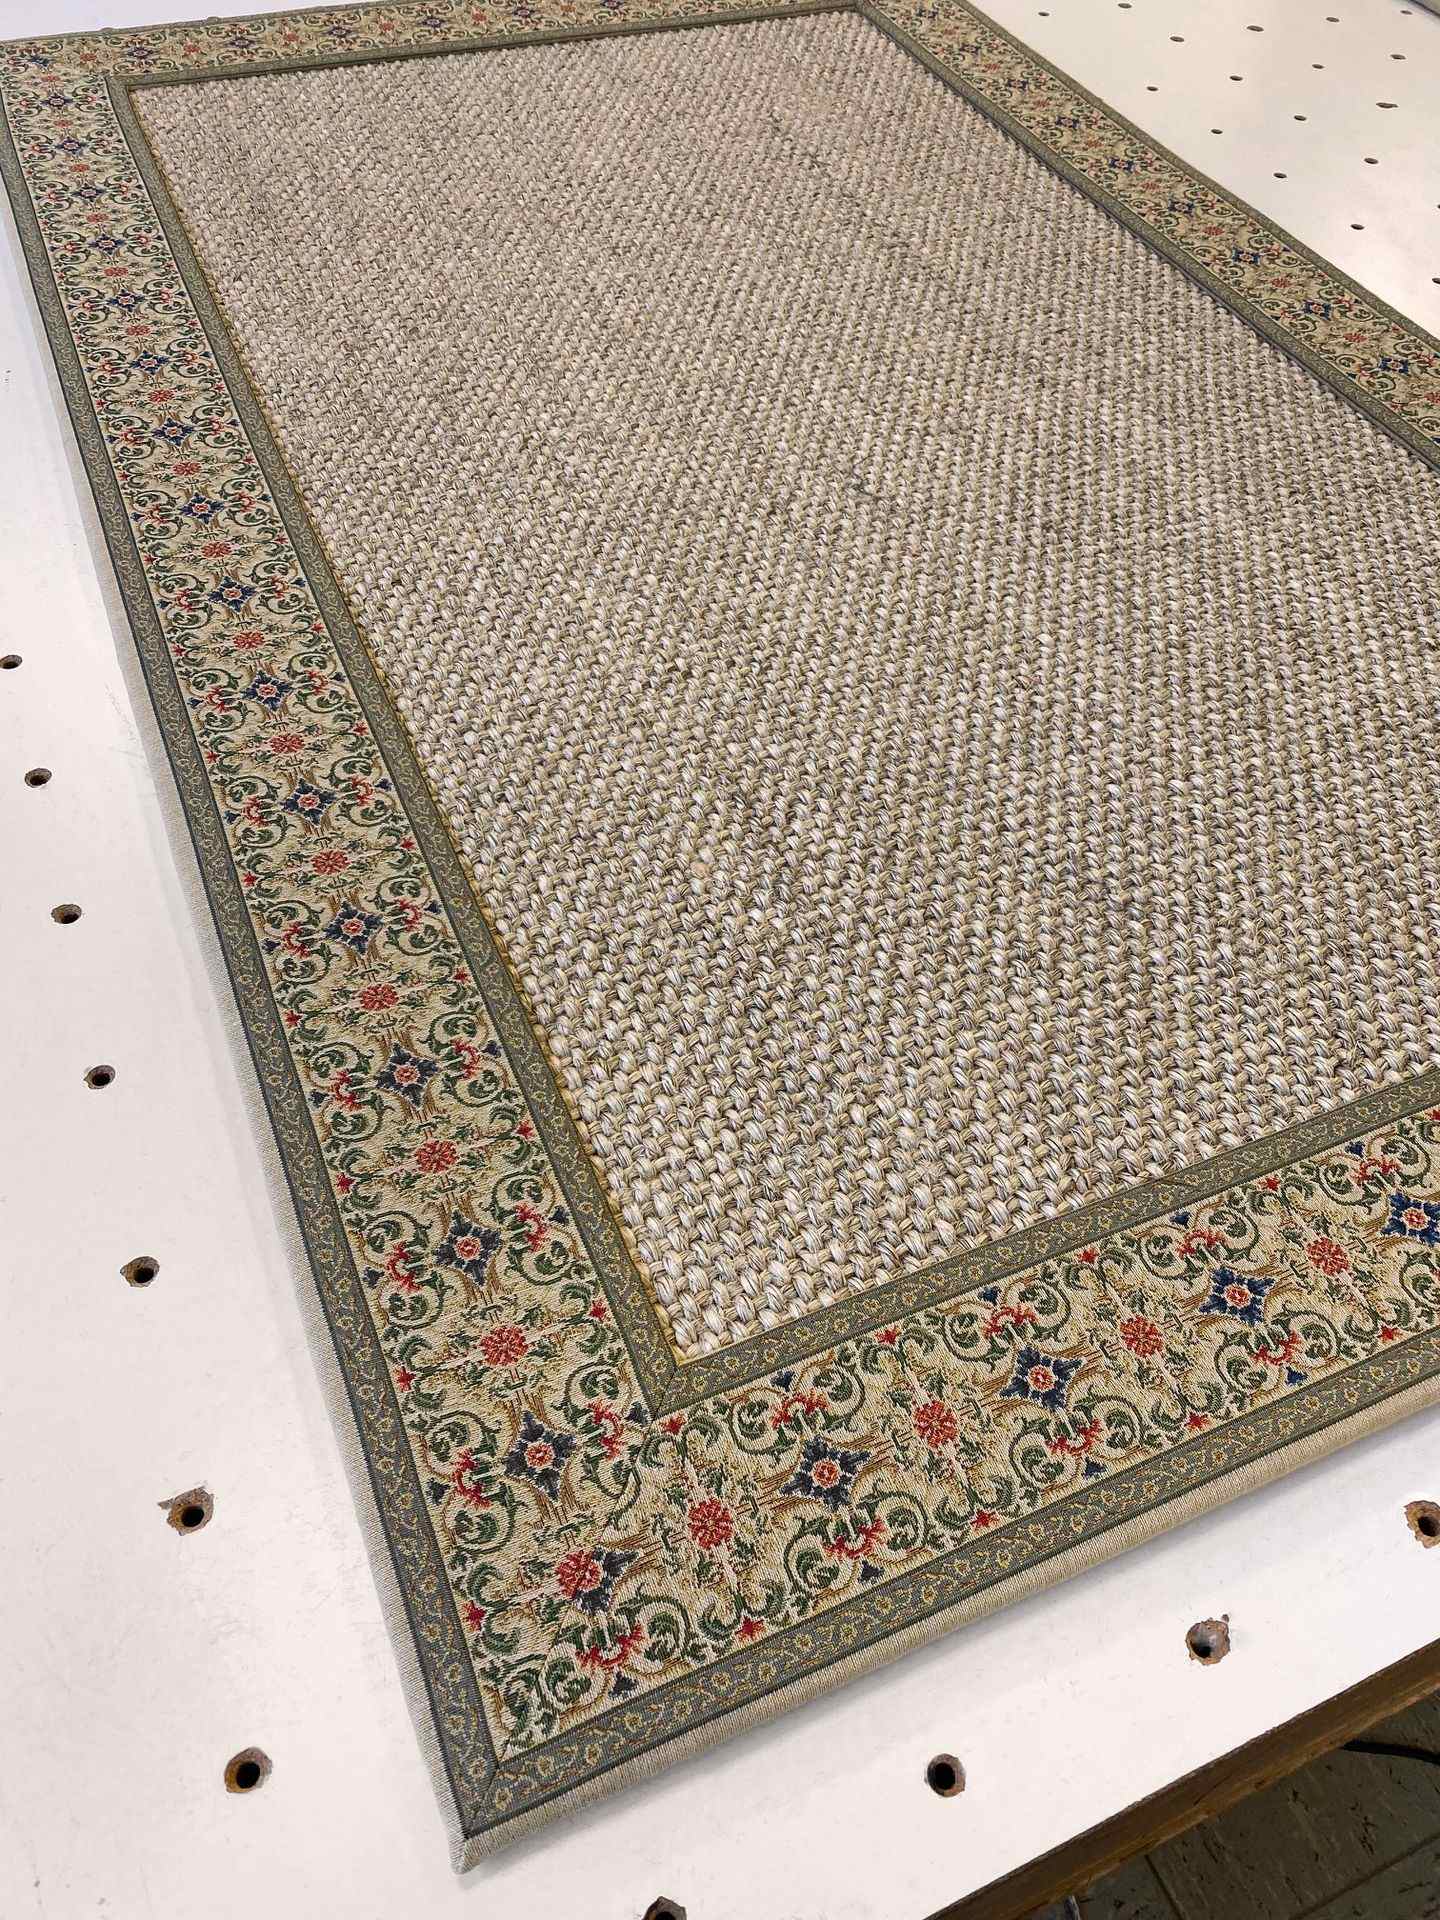 Photo of a sisal rug with an intricately jacquard-woven border in a classic style, backed with hidden stitching.